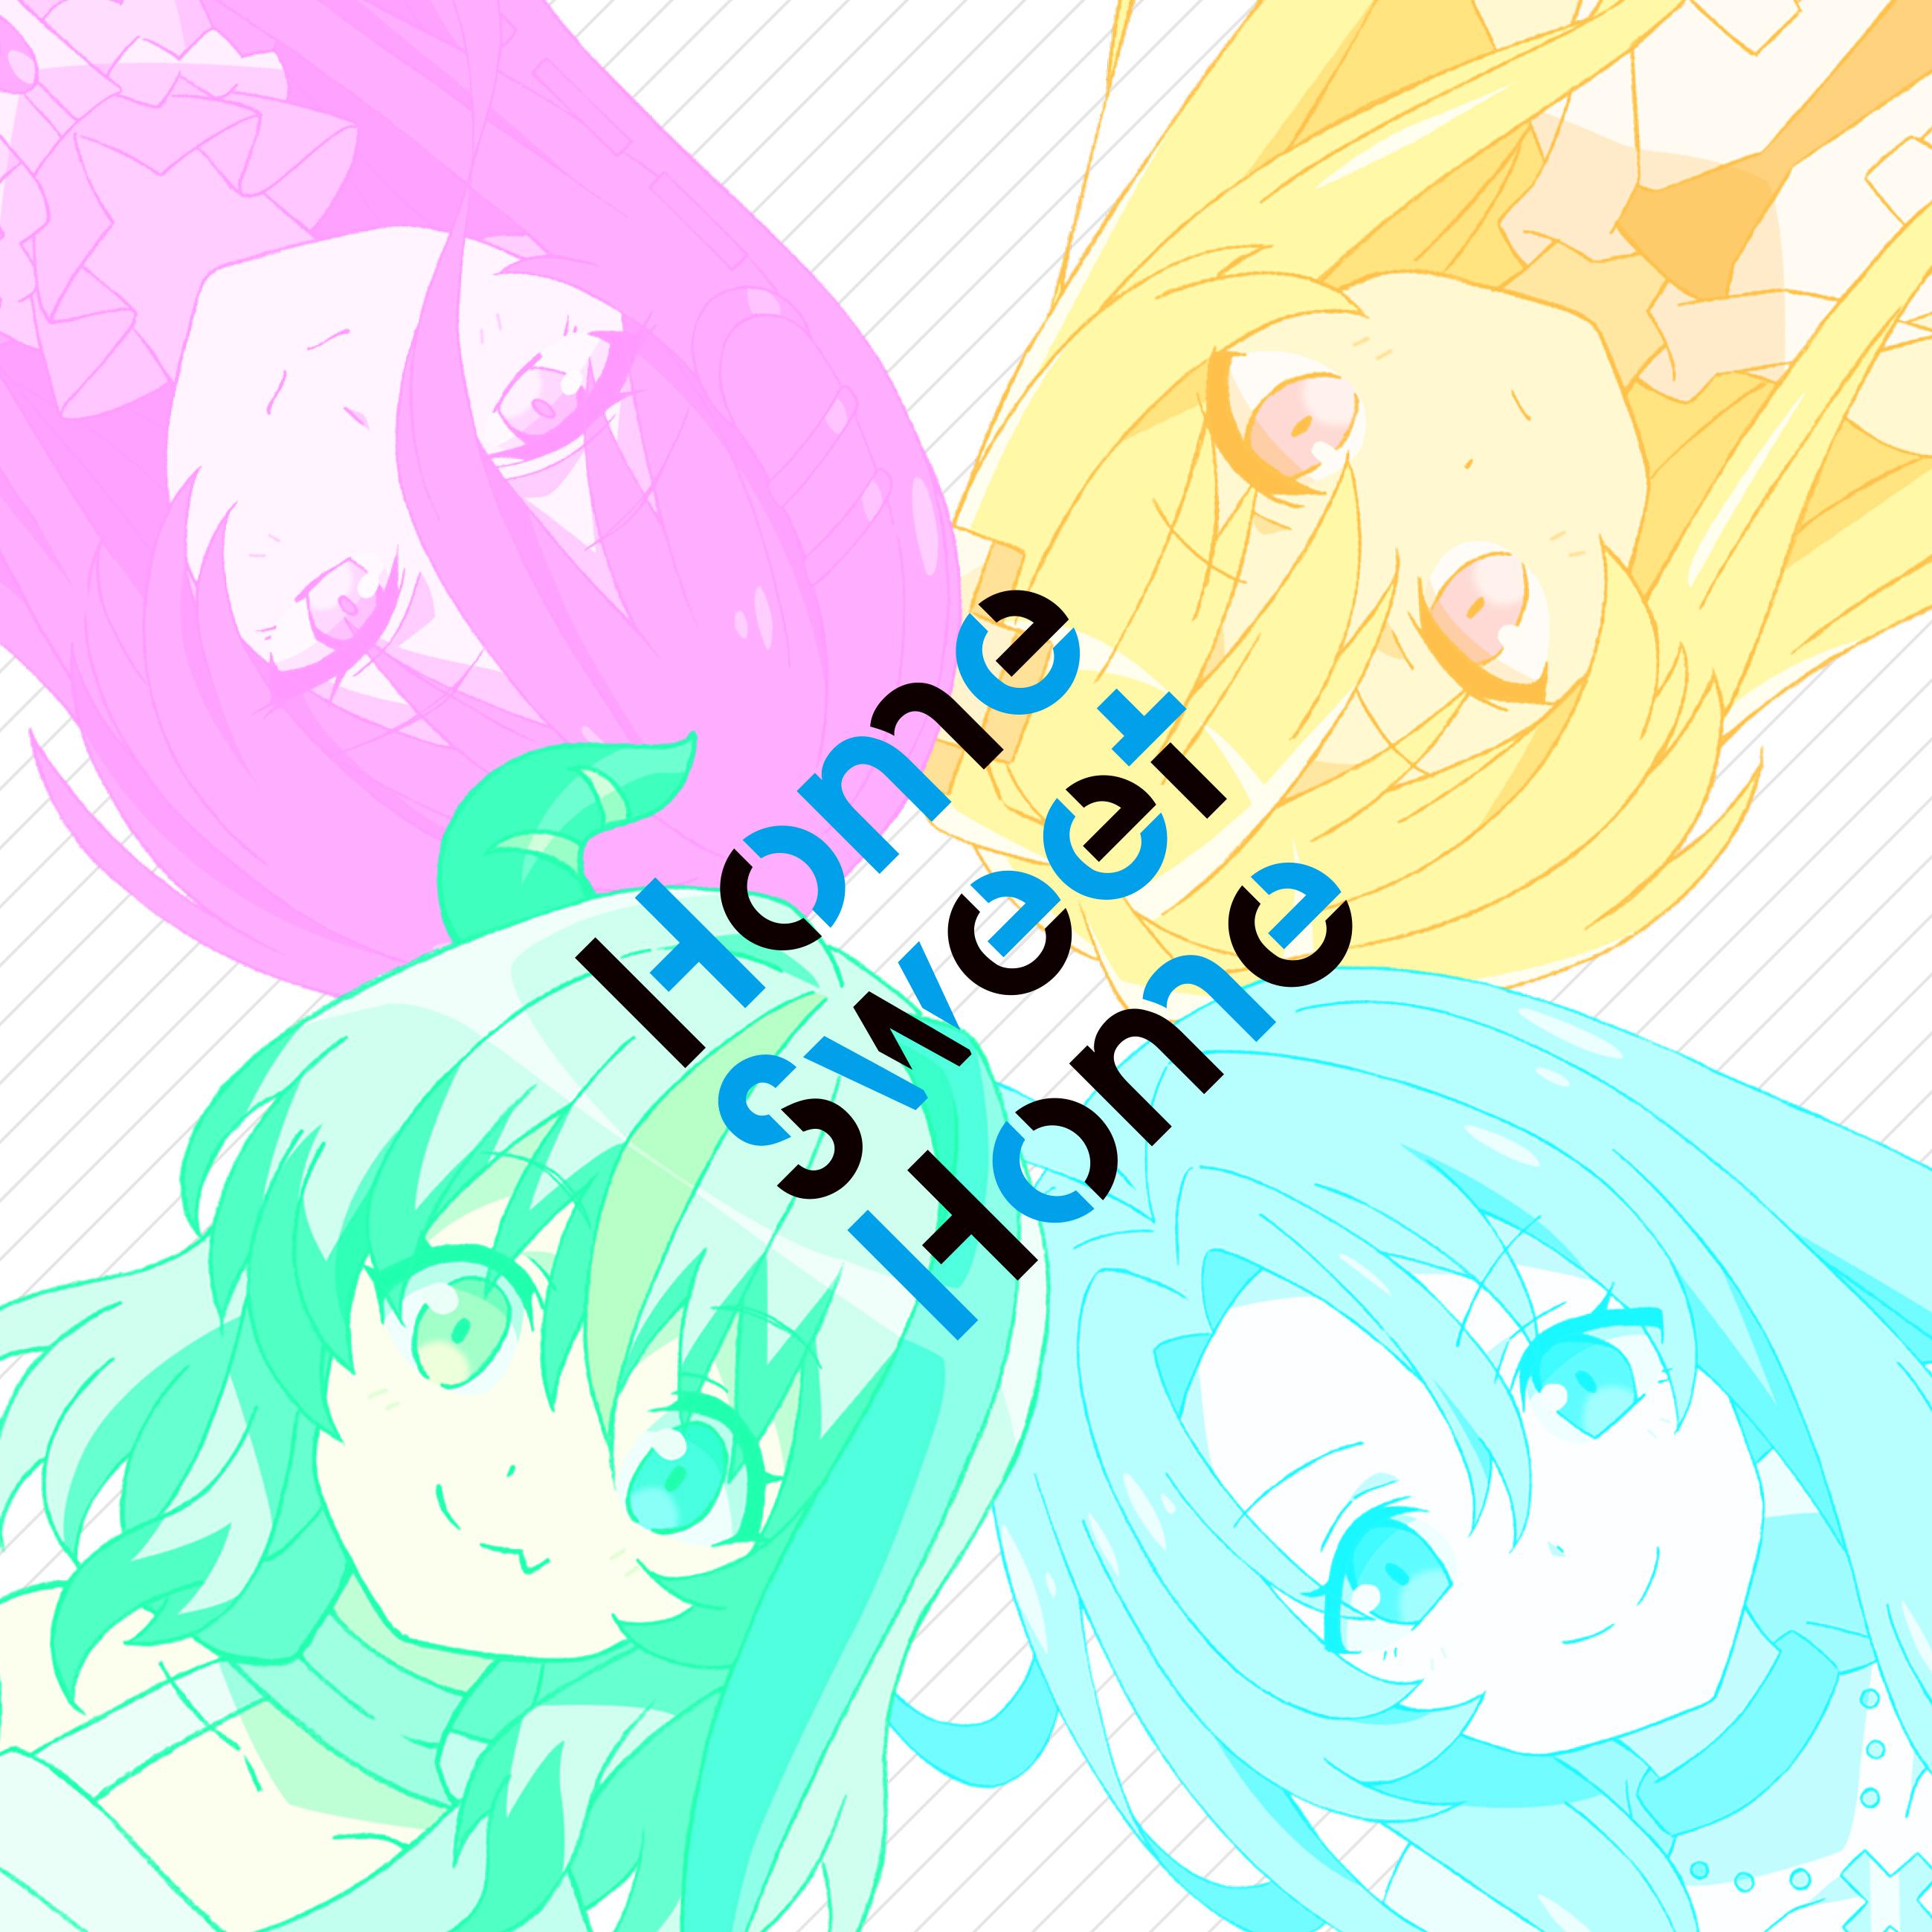 Home Sweet Home (グリム ver.)歌词 歌手高橋未奈美-专辑Home Sweet Home-单曲《Home Sweet Home (グリム ver.)》LRC歌词下载